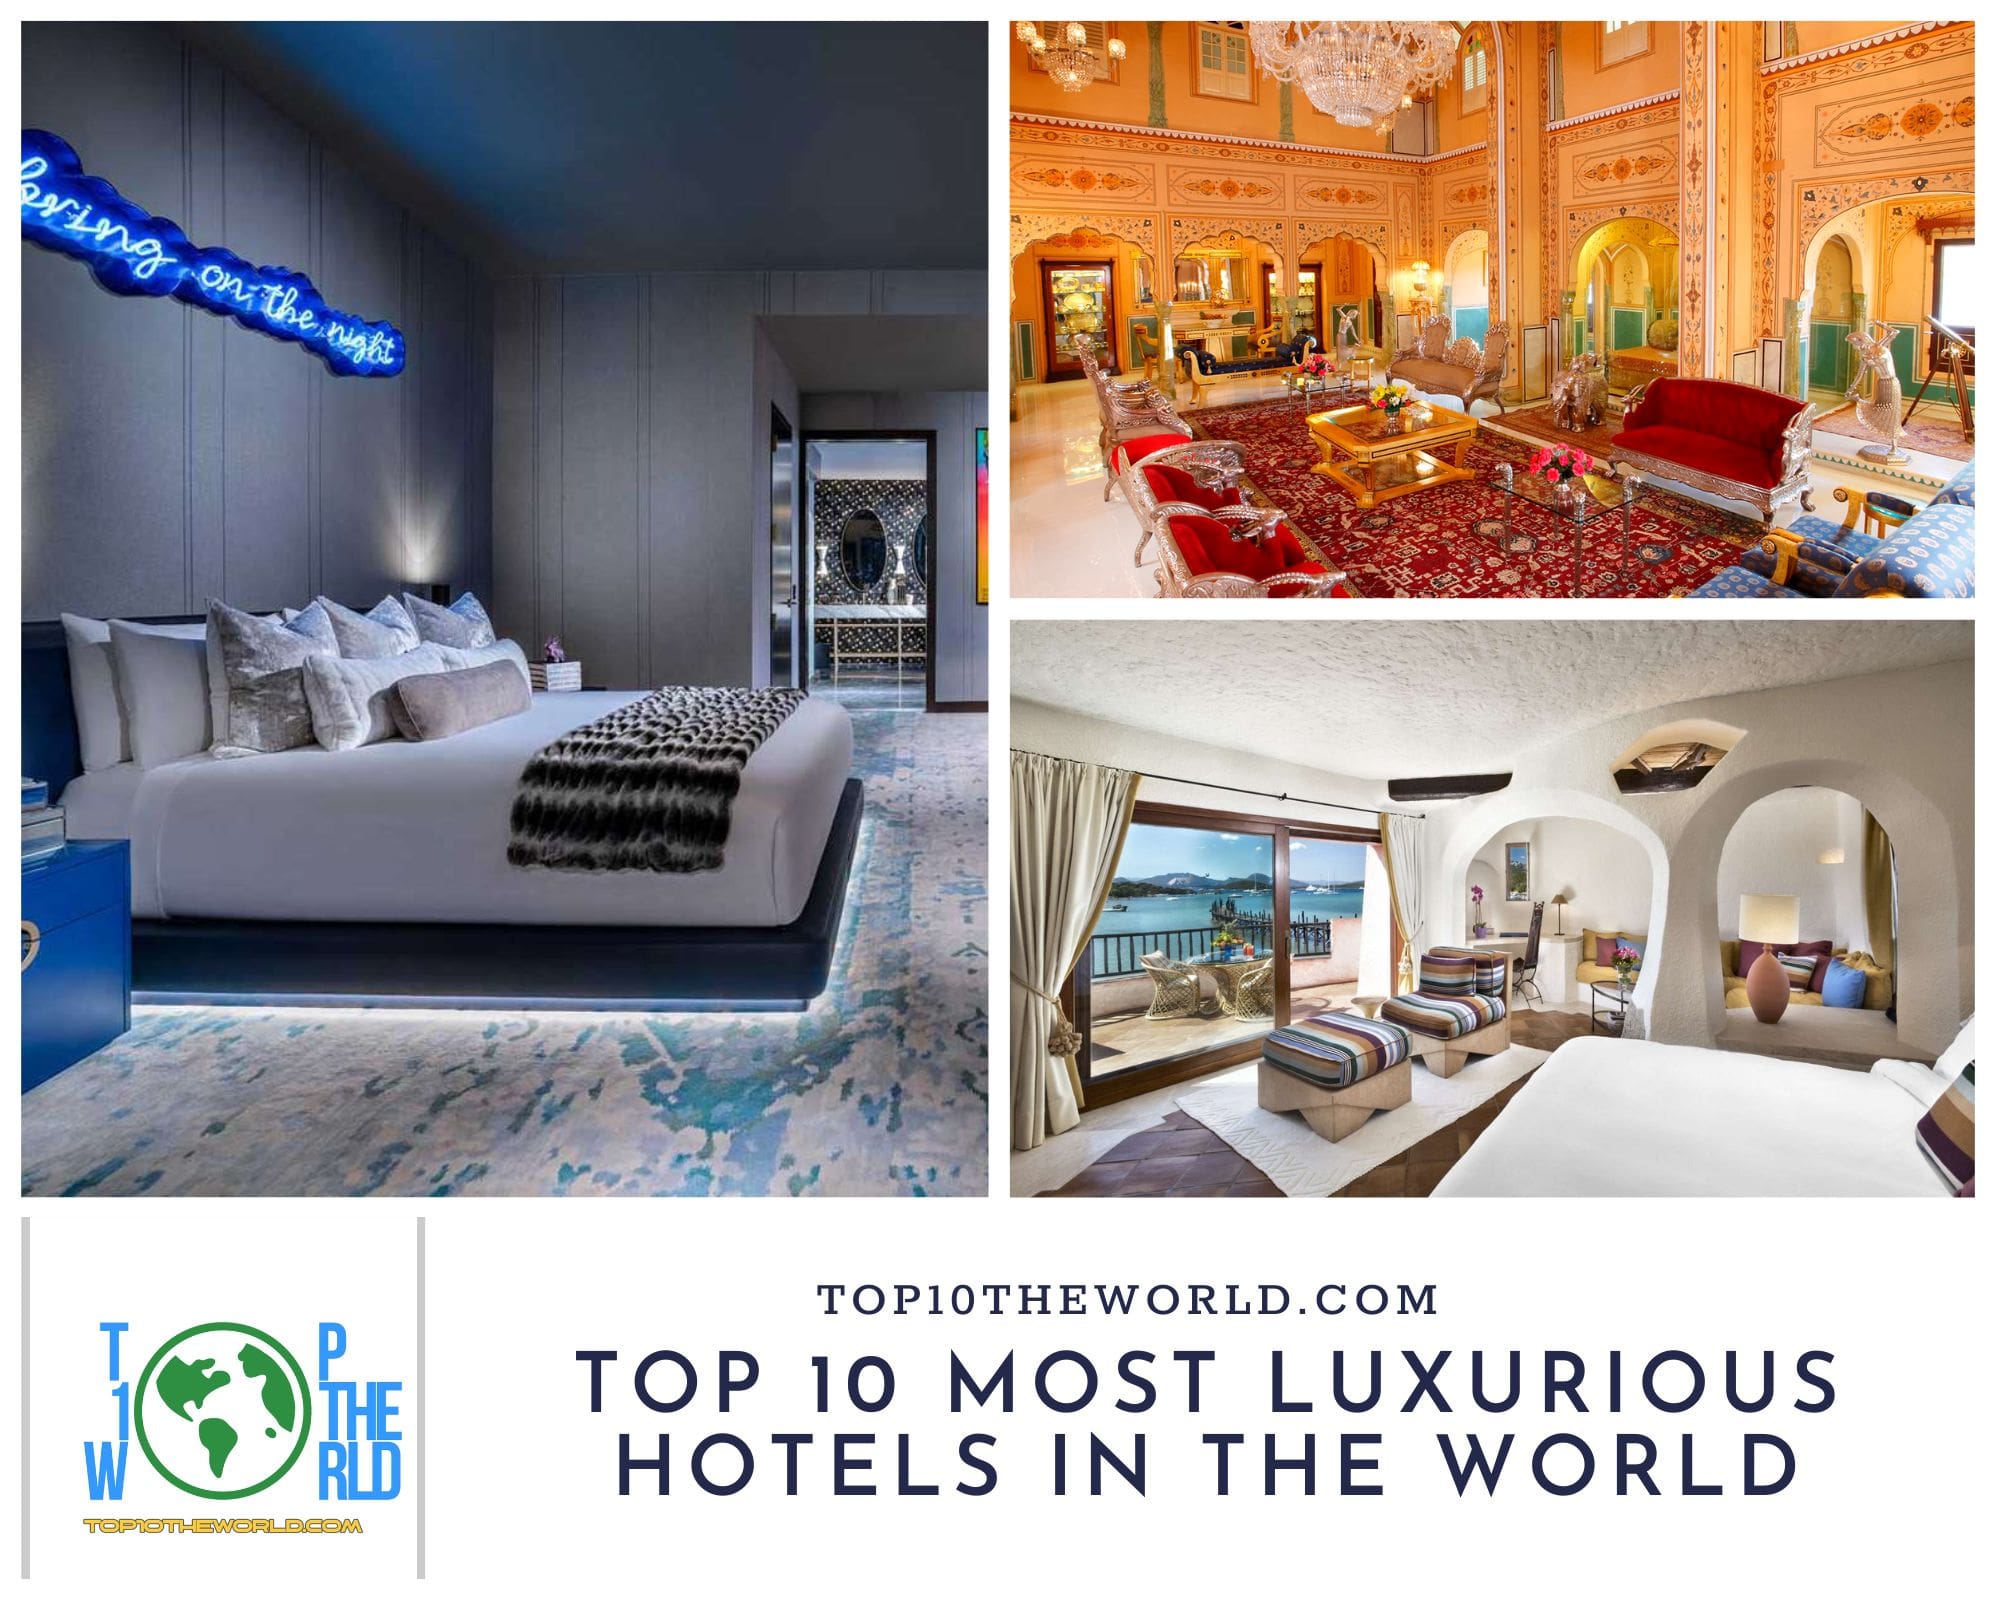 Top 10 Most Luxurious Hotels in the world